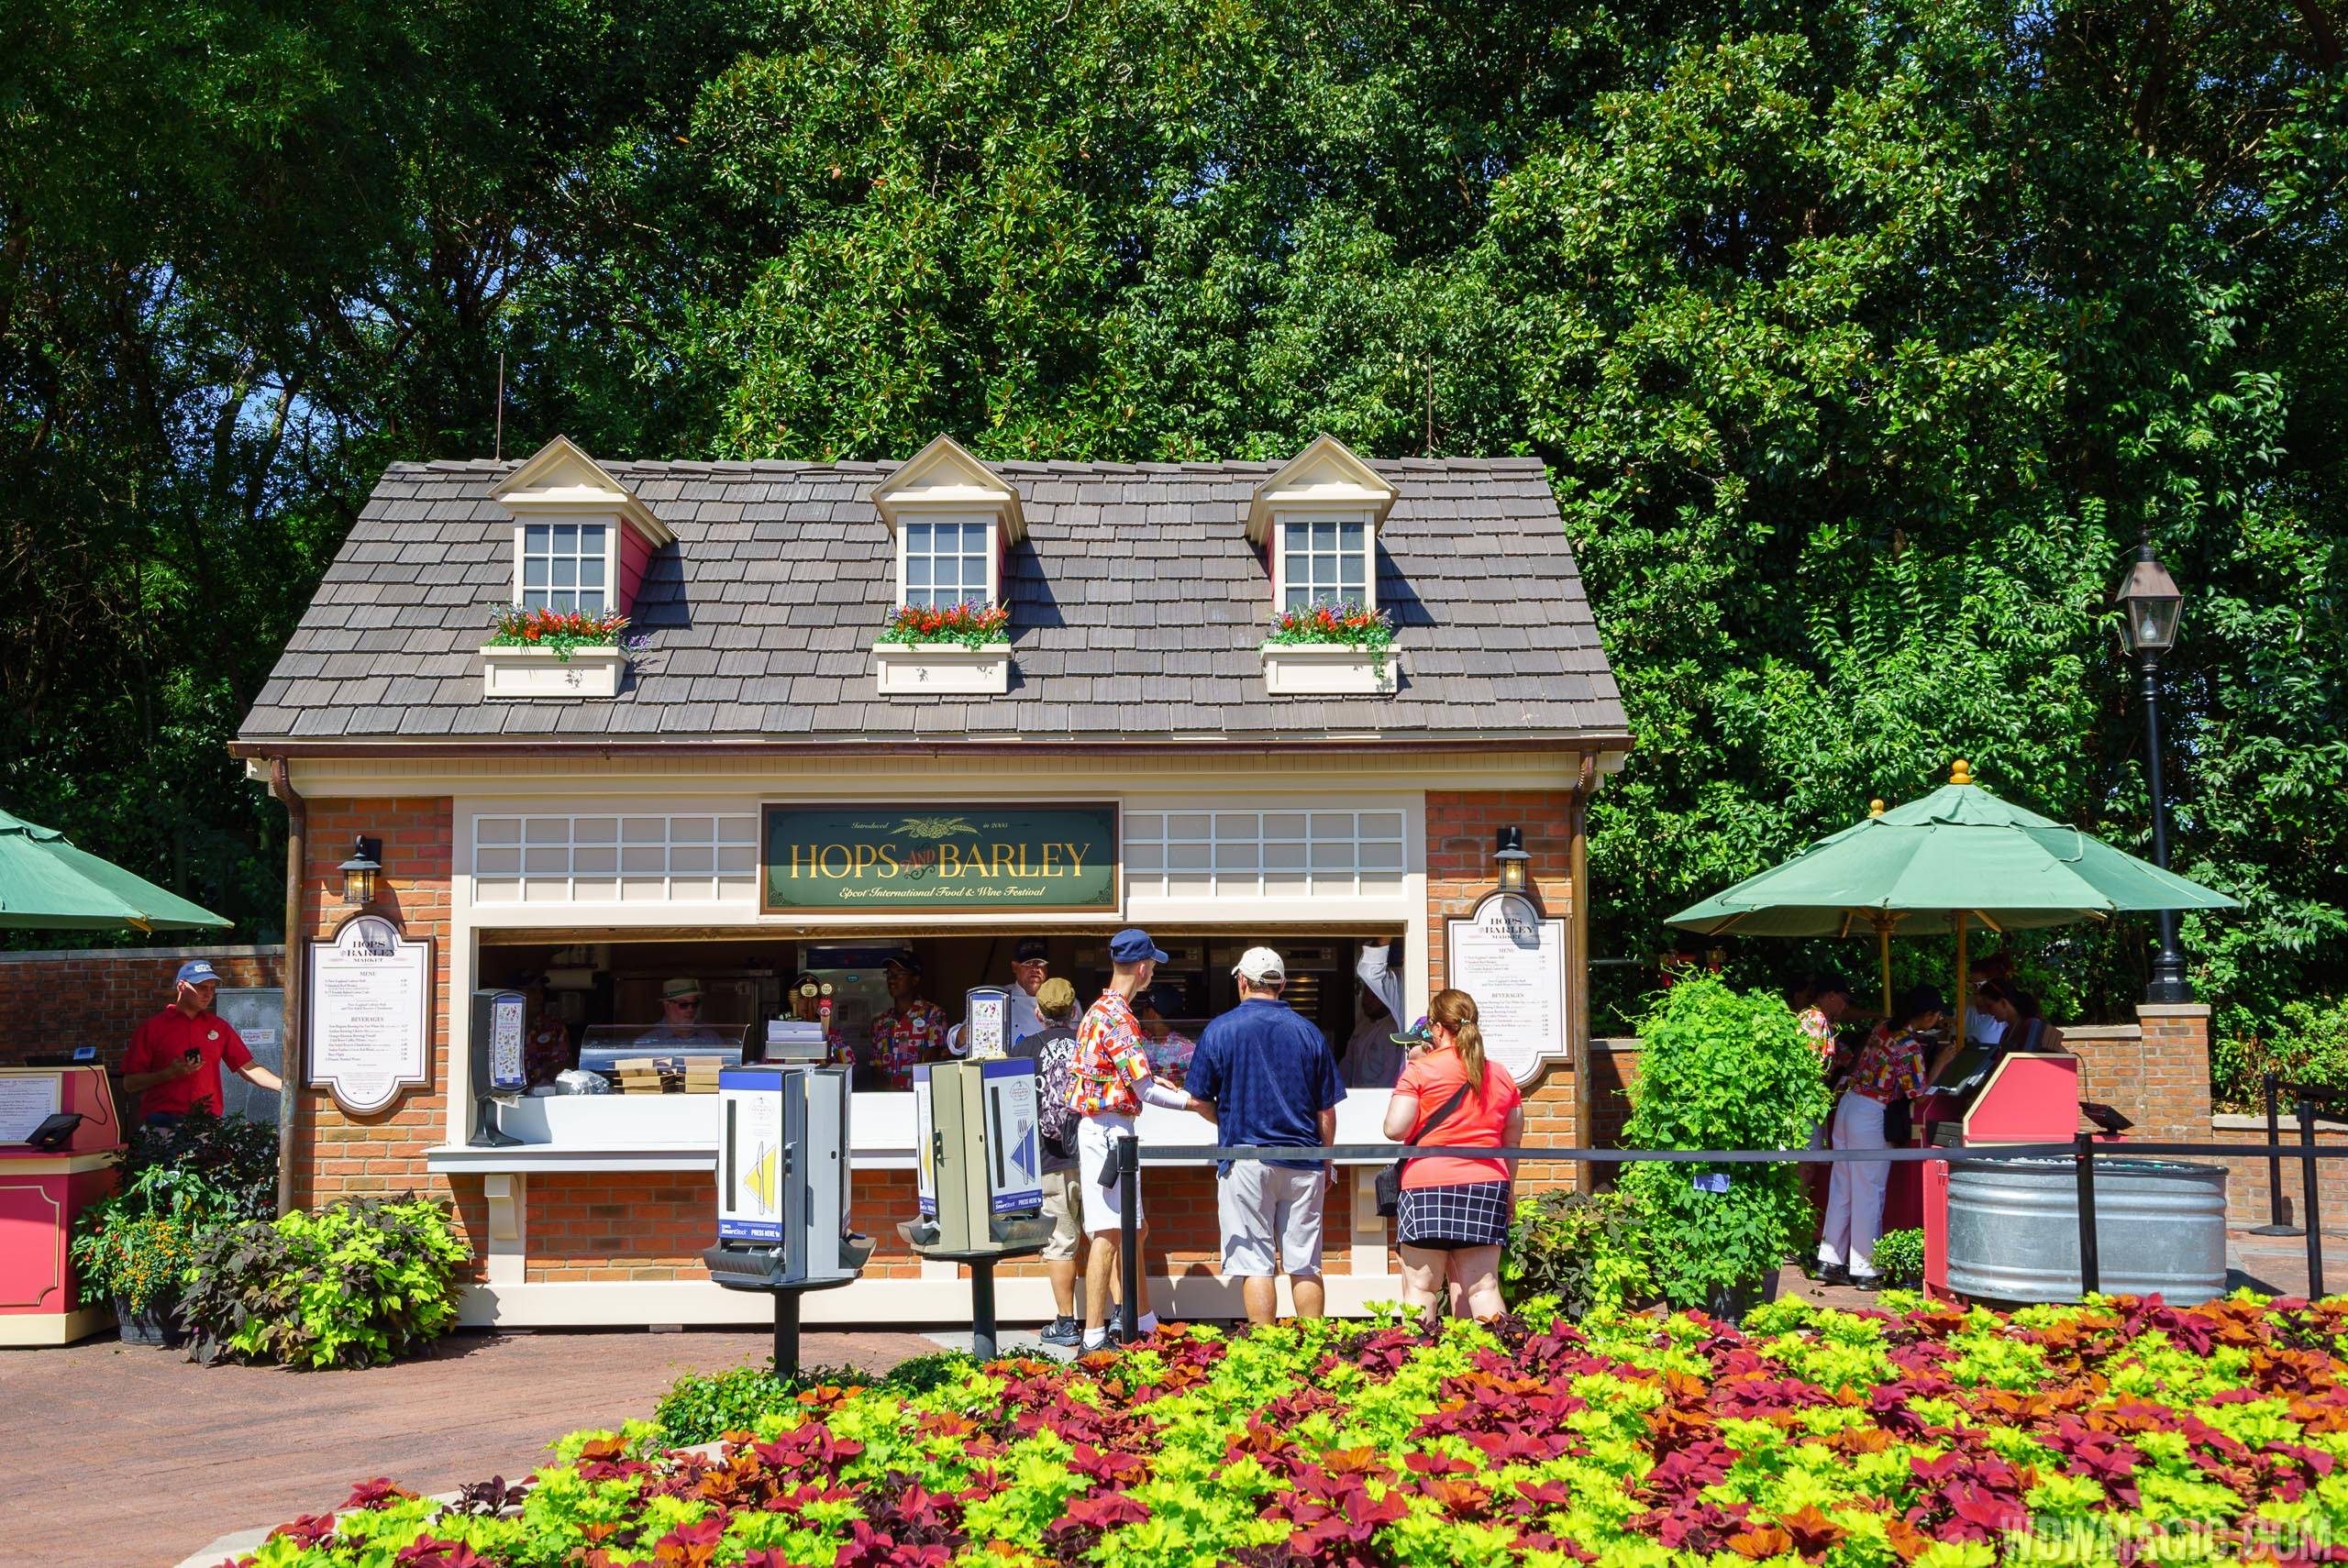 2017 Epcot Food and Wine Festival - Hops and Barley marketplace kiosk